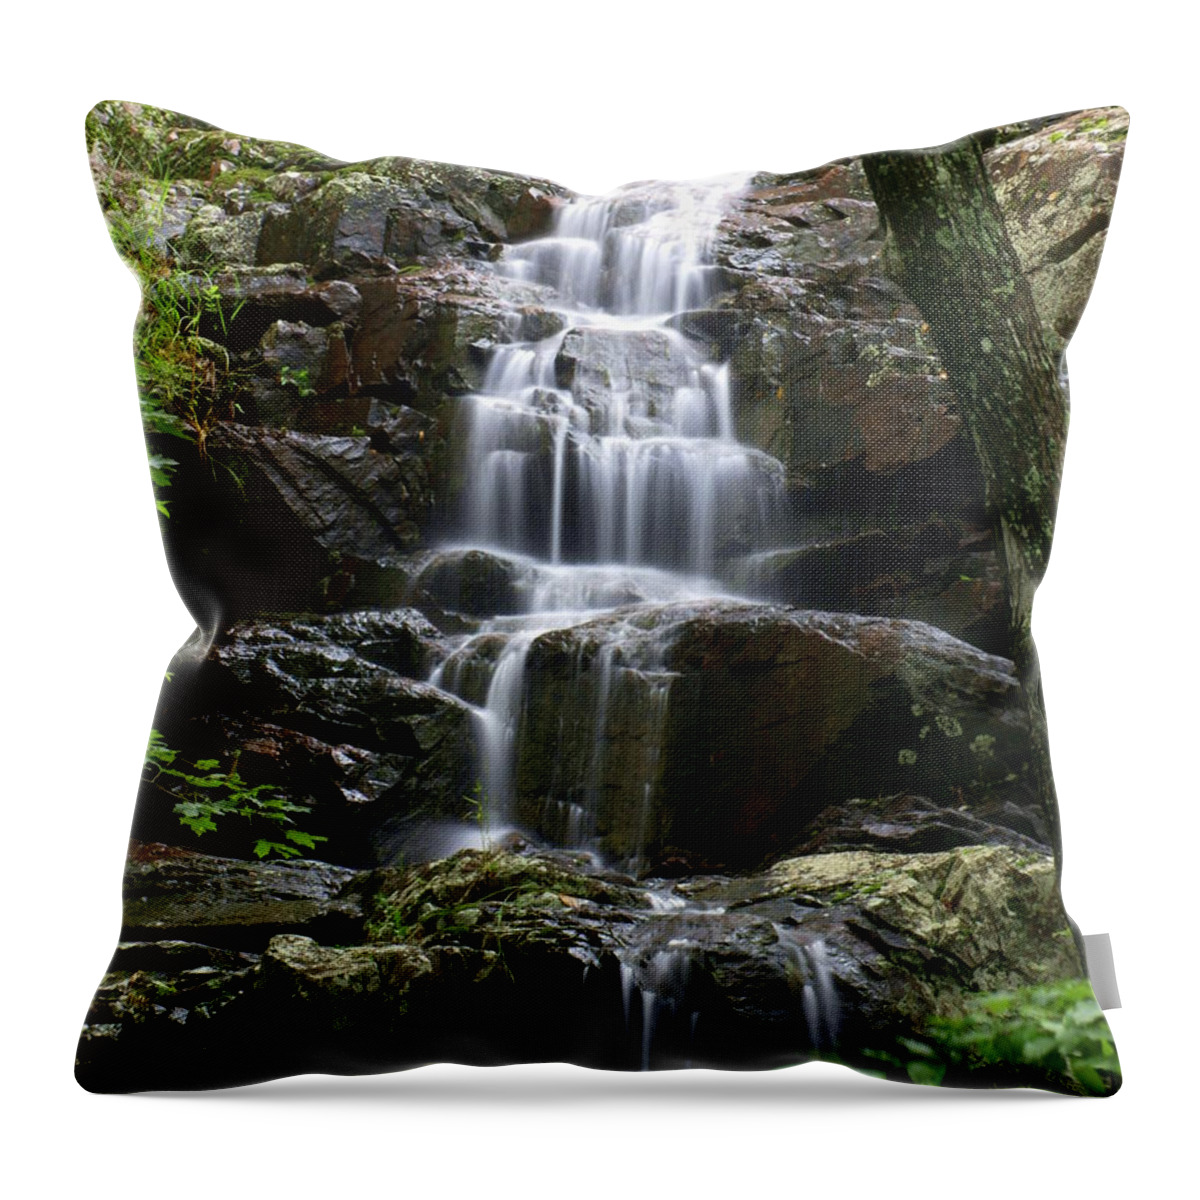 Waterfalls Throw Pillow featuring the photograph E Falls by Marty Koch